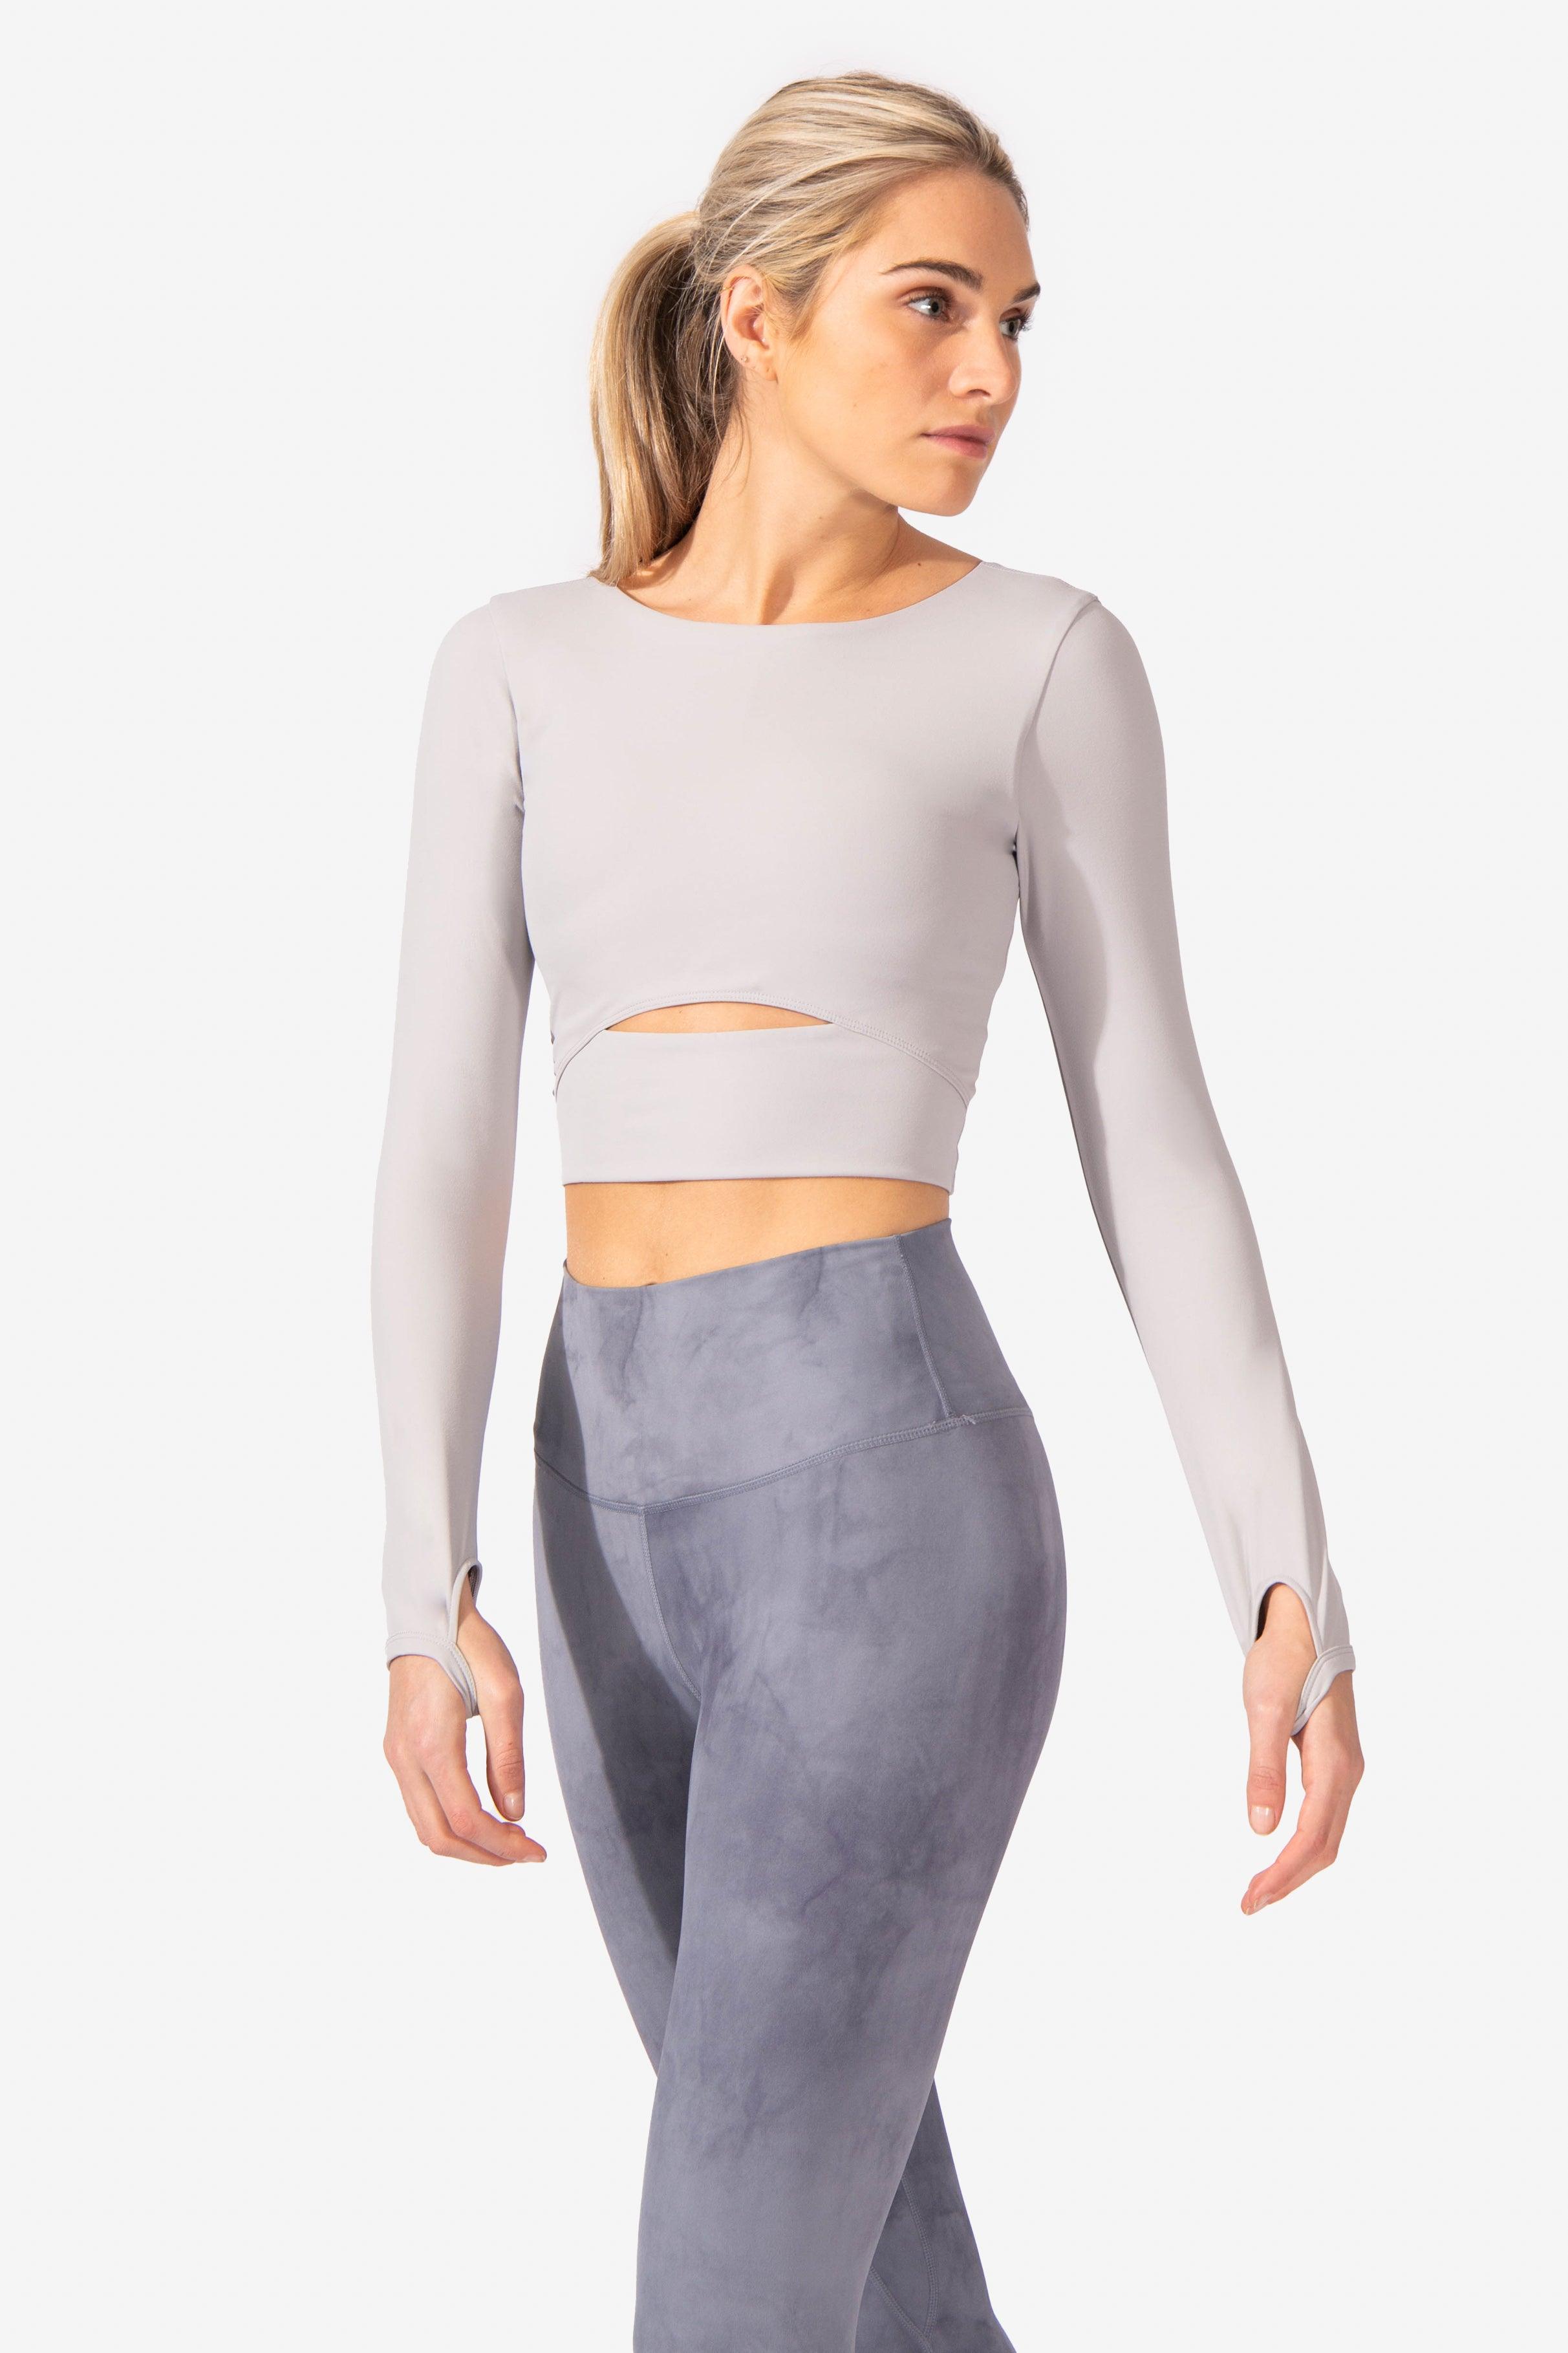 Empress Long Sleeve Crop Top - Gray - Jed North Canada